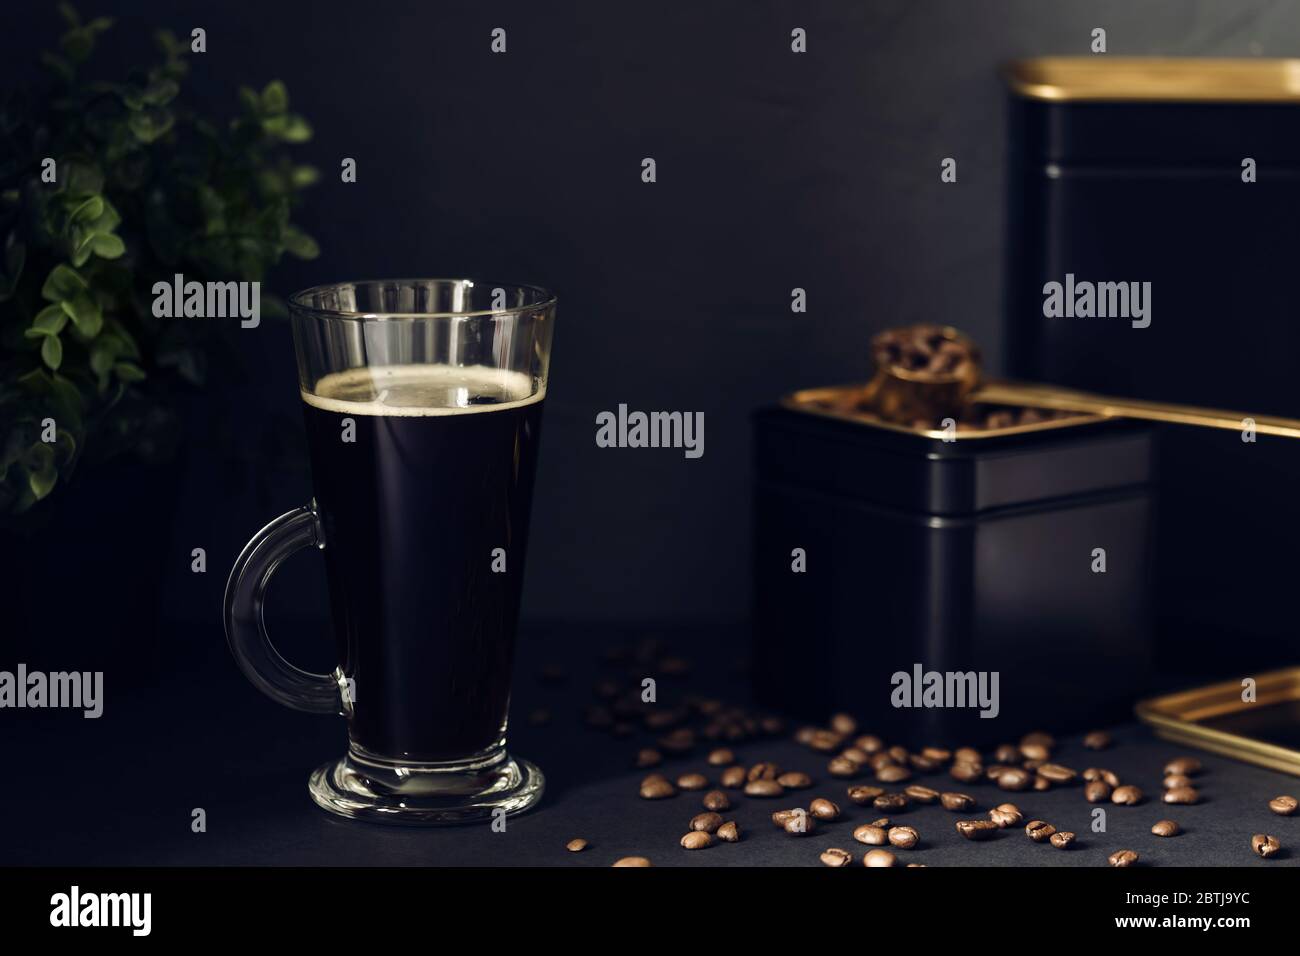 Transparent cup of hot black coffee on the black table. Coffee beans in a black tin can with a gold measuring spoon. Stock Photo